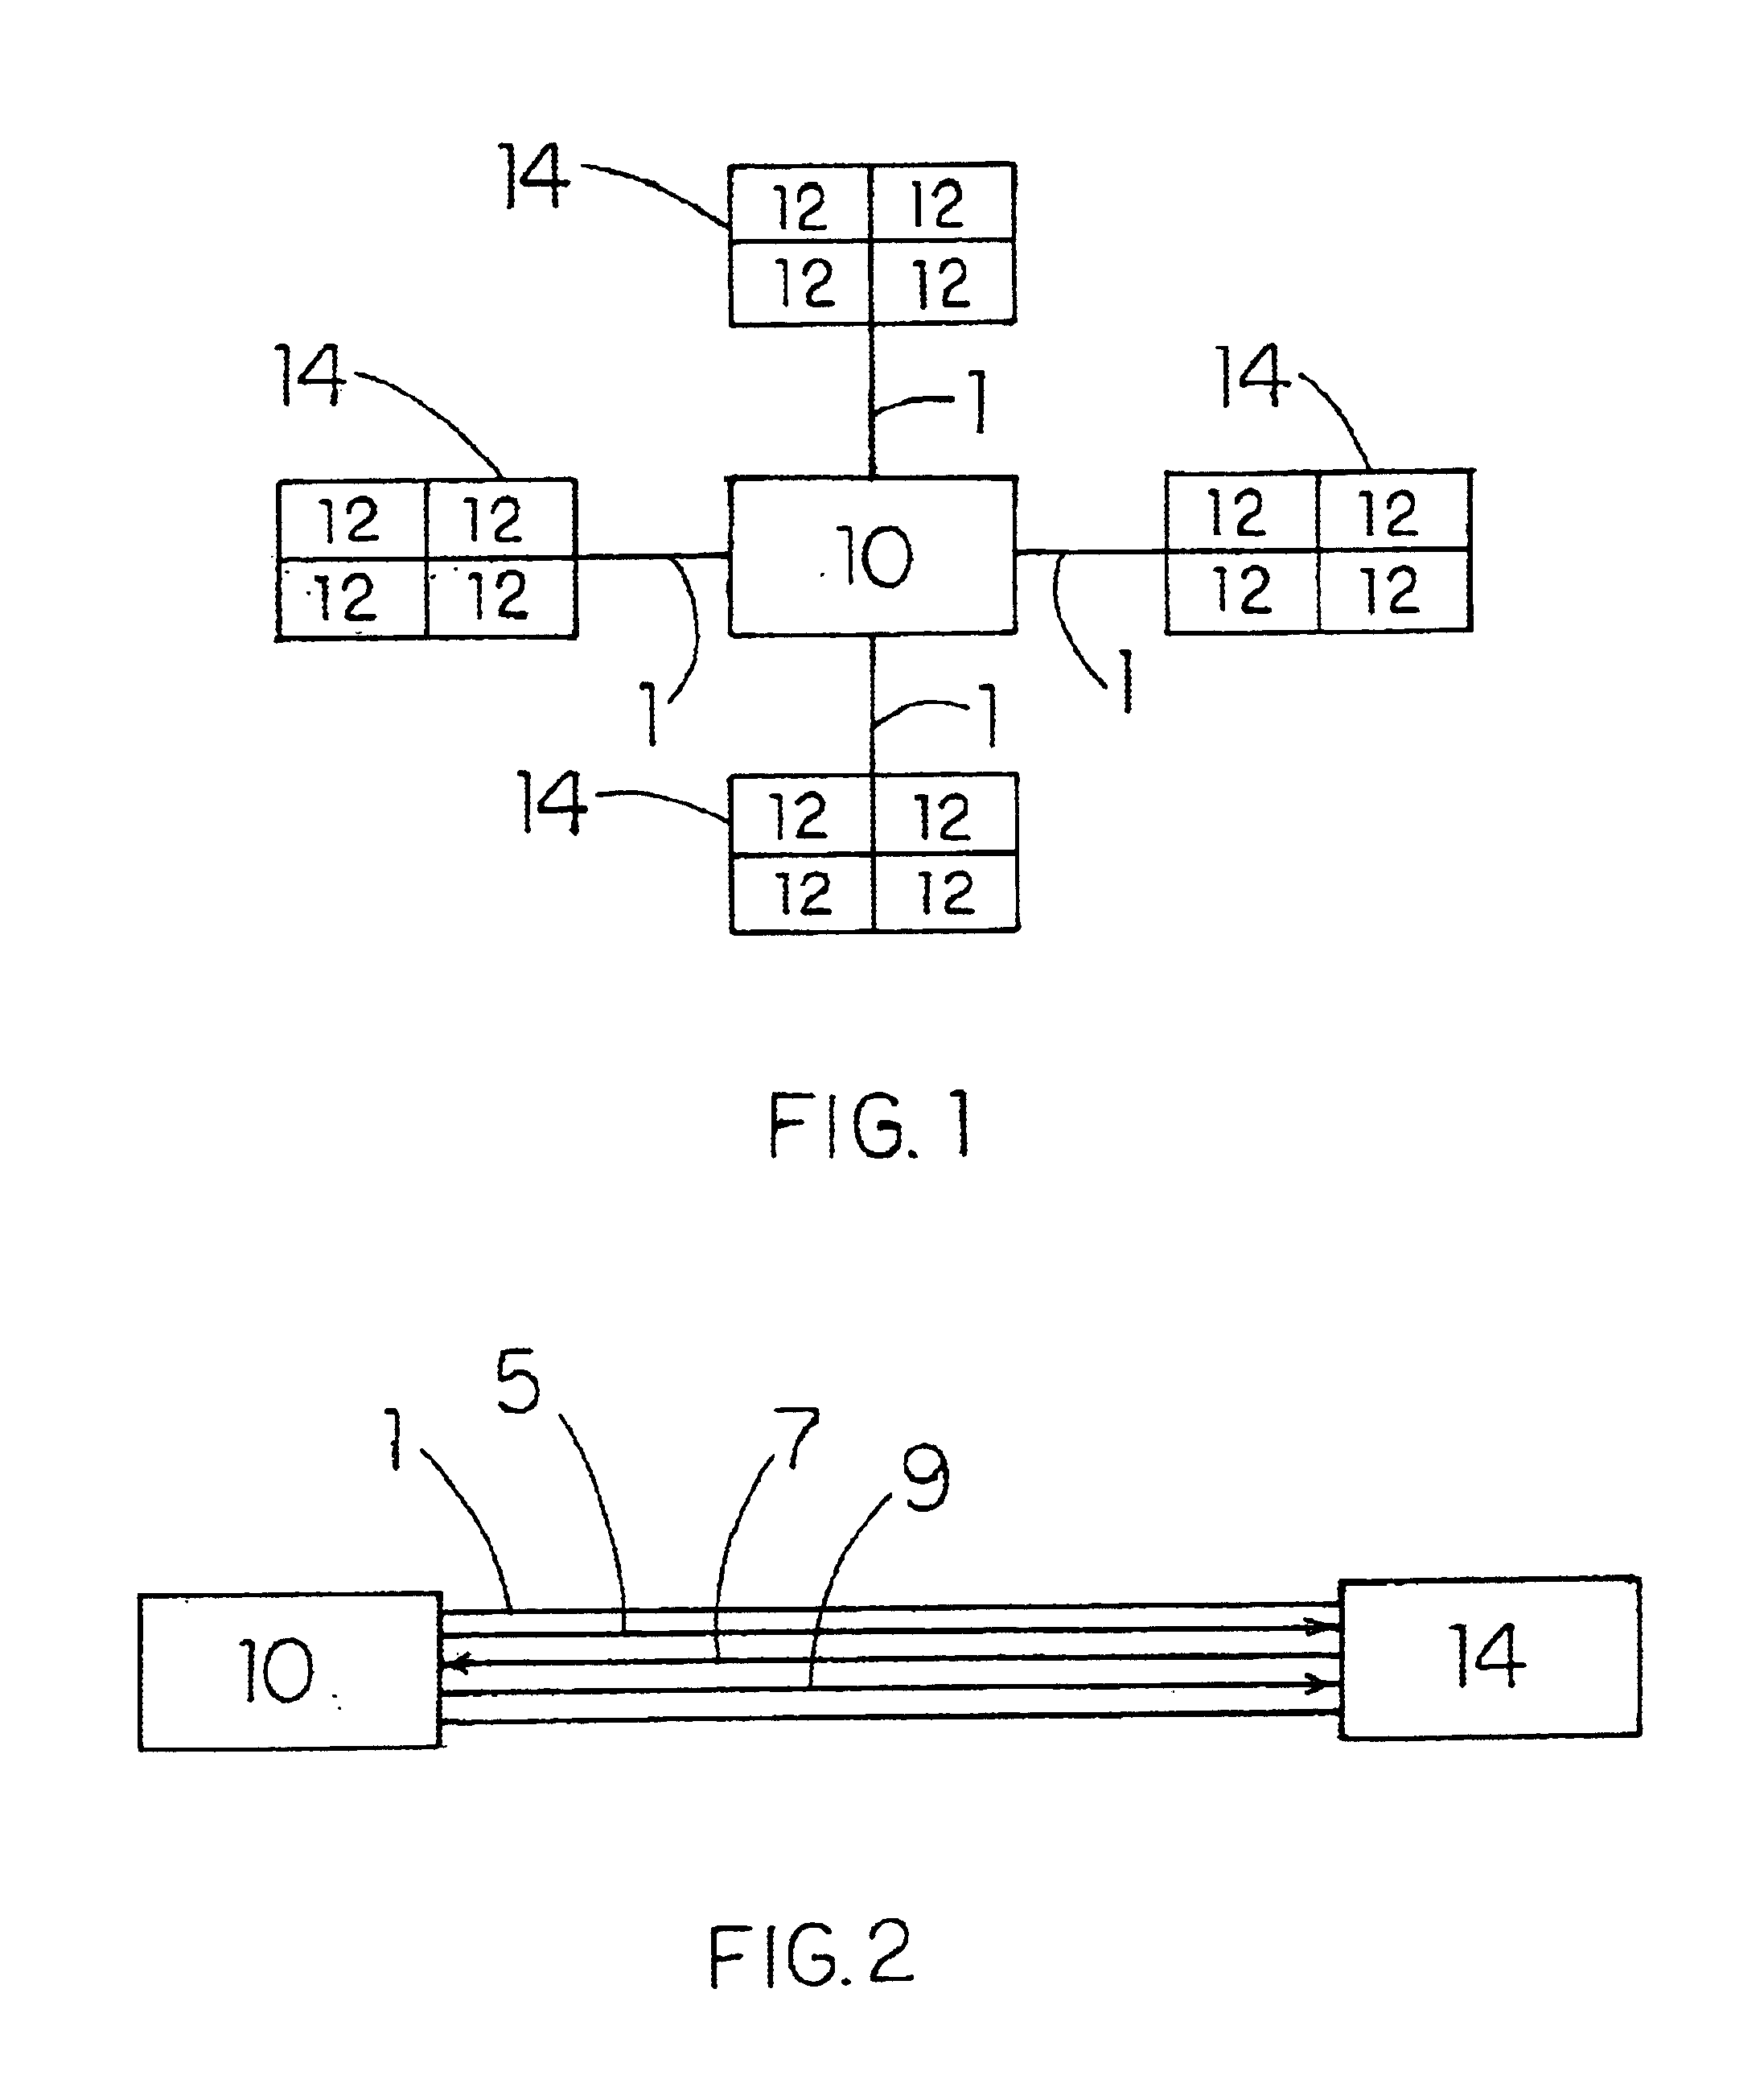 Remote supervision system and method